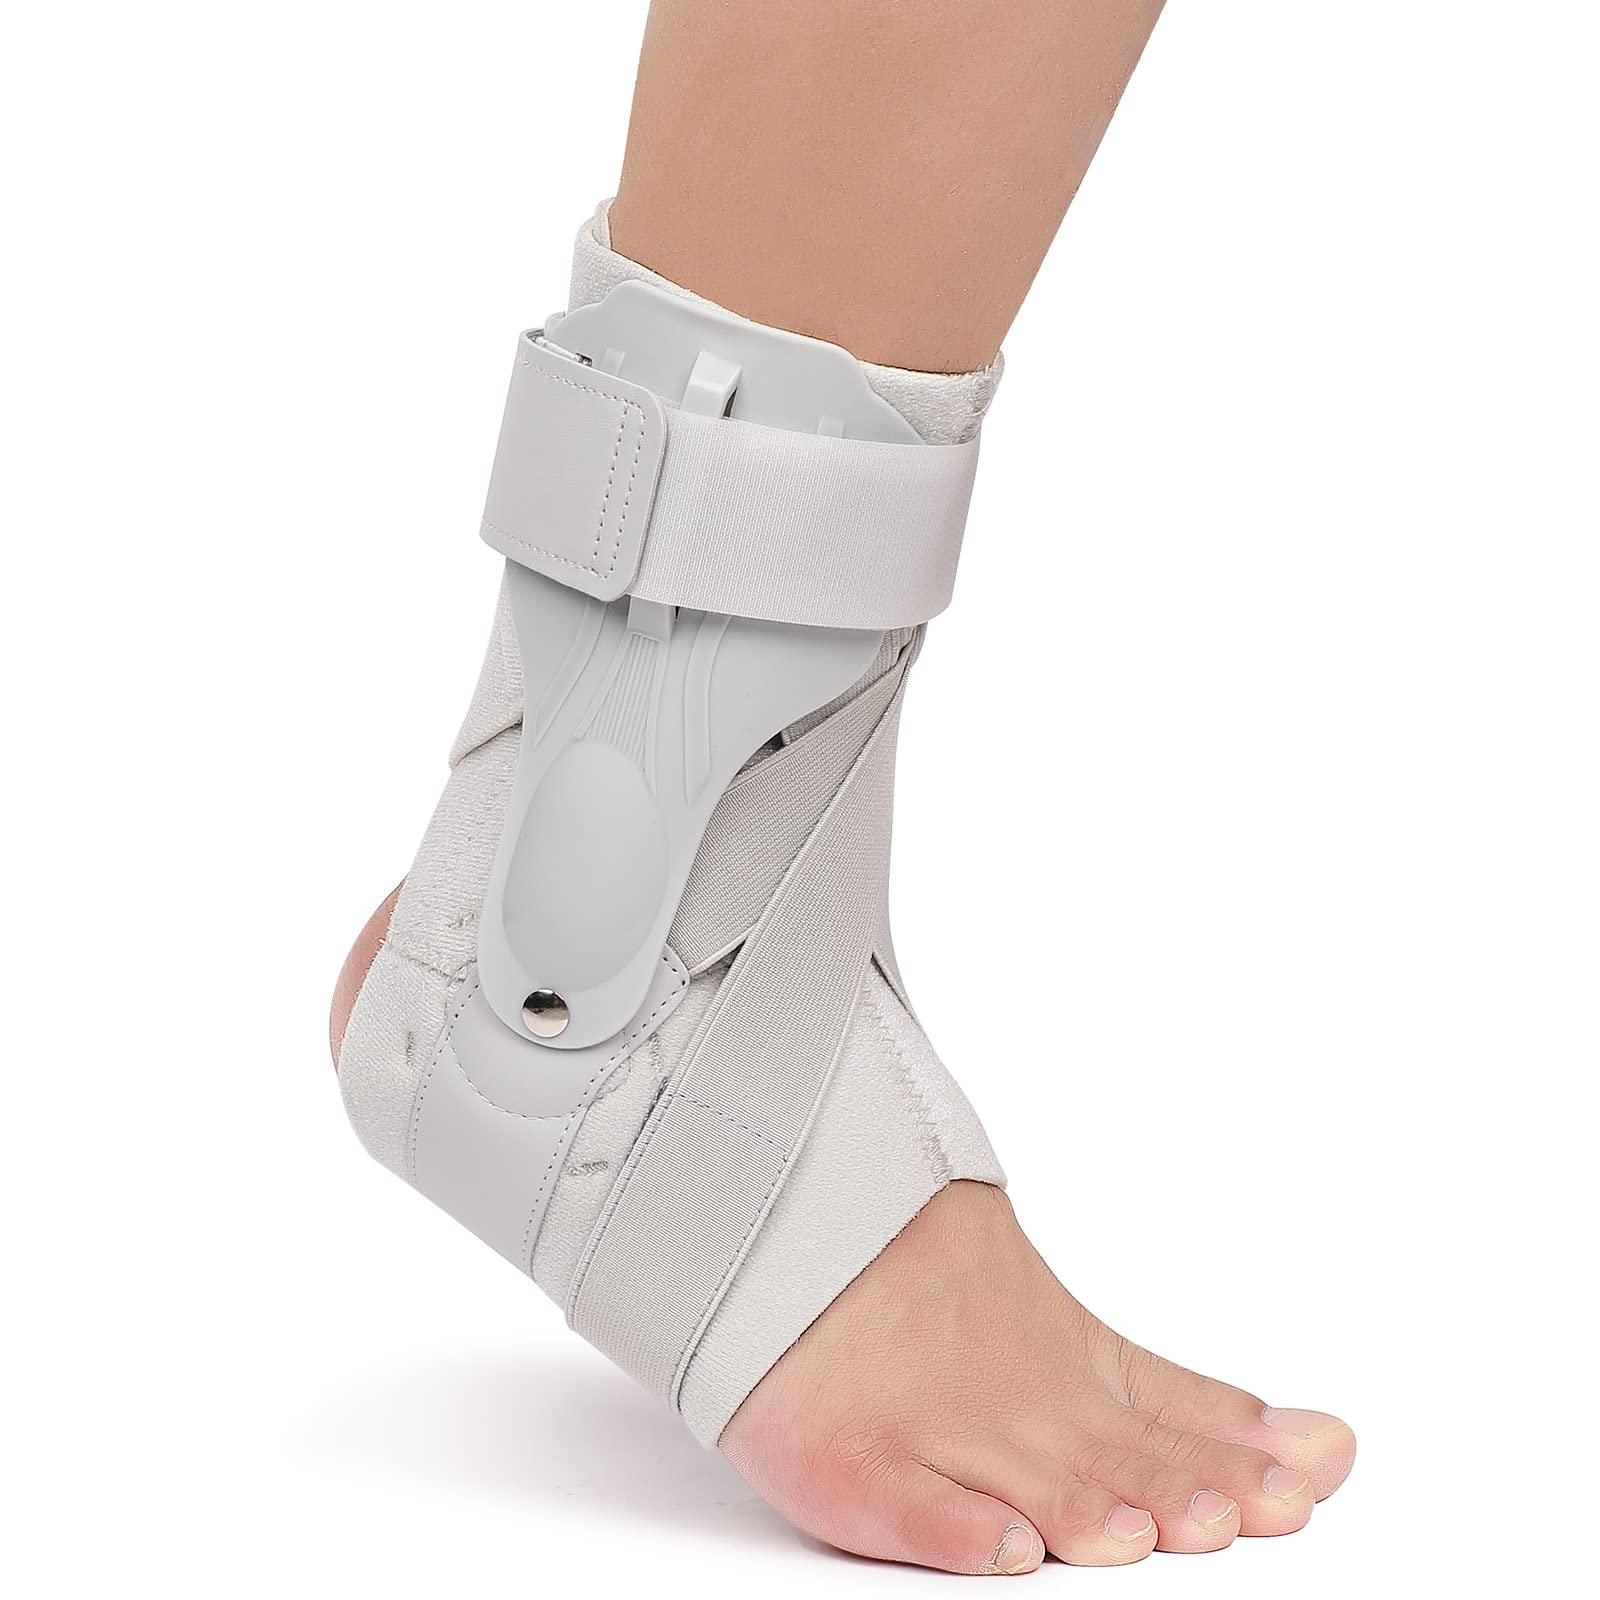 Buy Tuli's X Brace, Arch Support Brace and Compression for Sever's Disease,  Plantar Fasciitis, Heel Pain, Flat Feet, Fallen Arches and Over-Pronation,  1 Pair, X-Small Online at Lowest Price Ever in India |